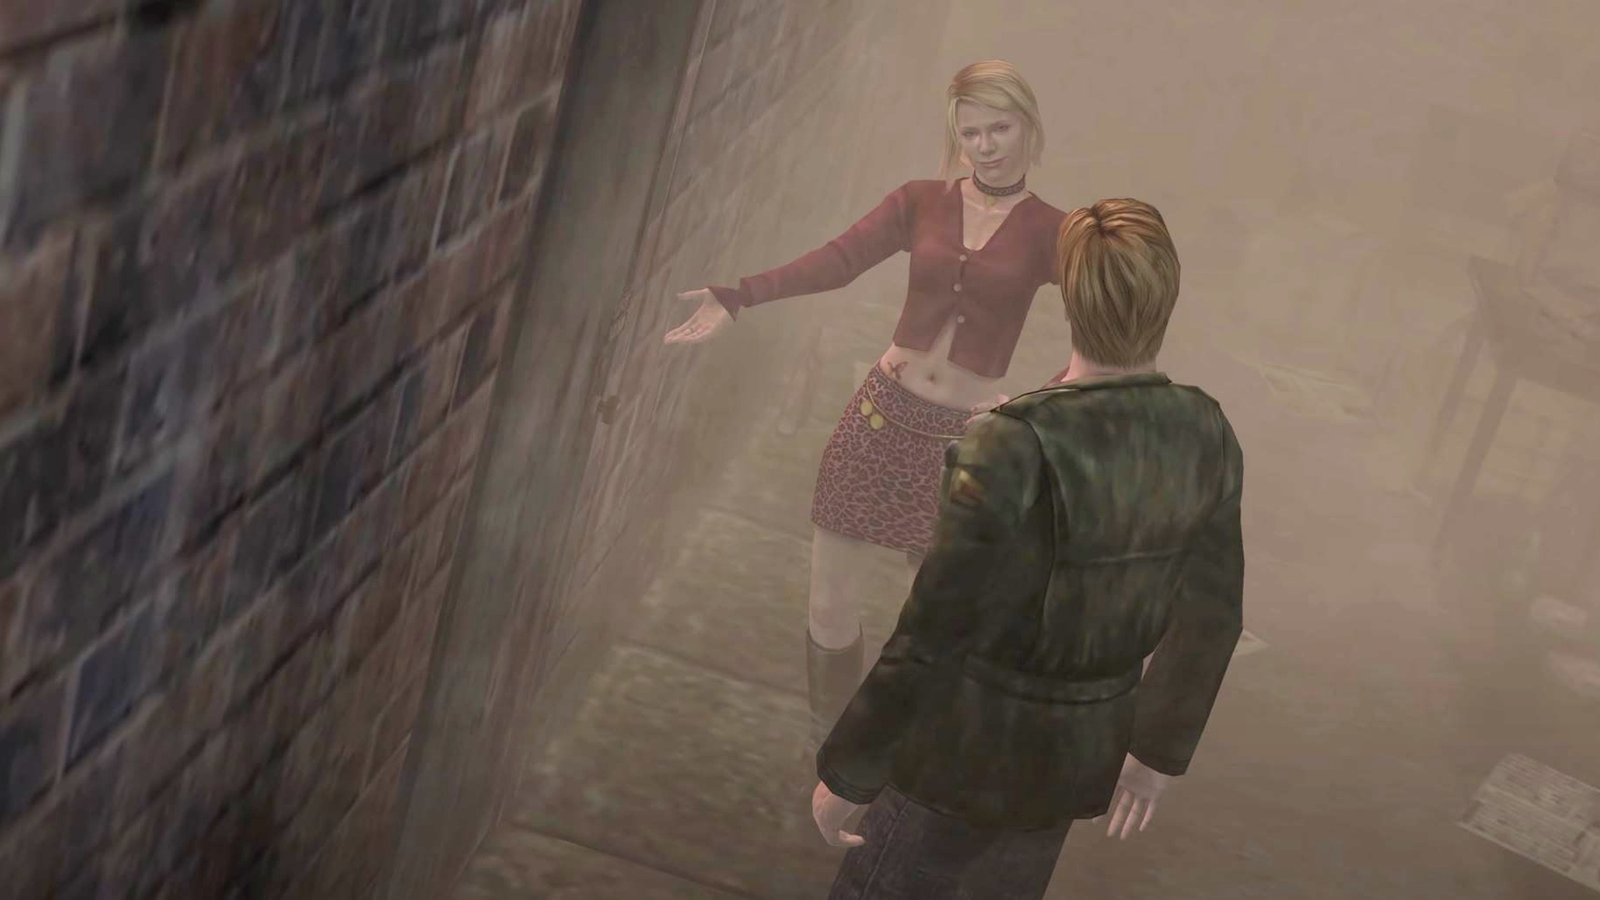 Steam Community :: Screenshot :: Silent Hill 2 in delicious 4K